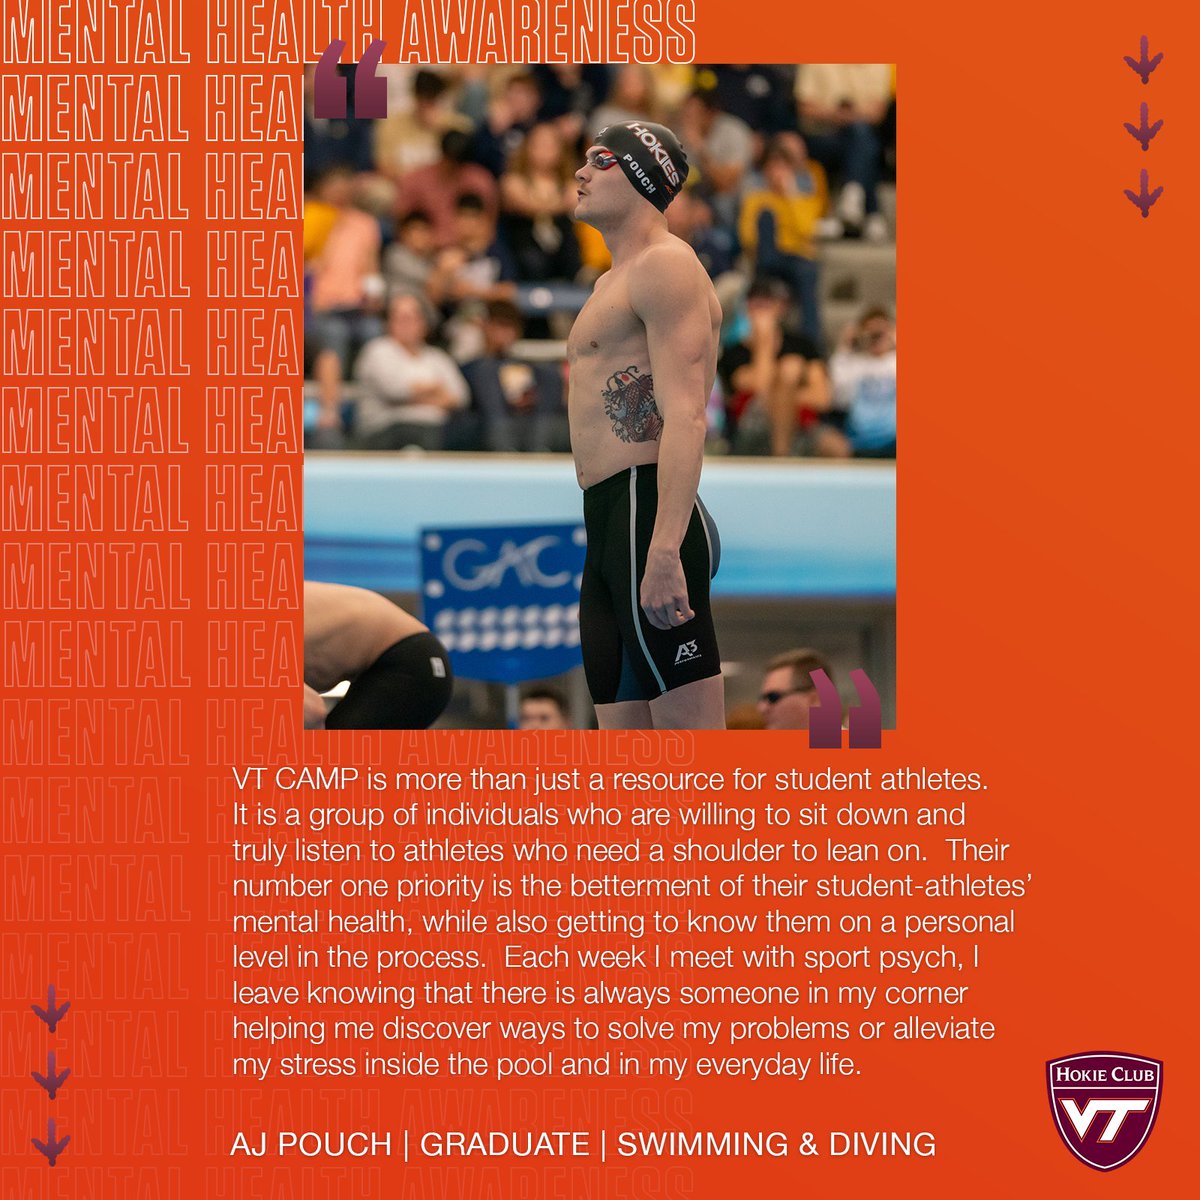 Making an impact, in and out of the pool 🏊 AJ Pouch had high praise for the Counseling and Athletic Mental Performance team at Virginia Tech. Support CAMP: vthoki.es/XUu43